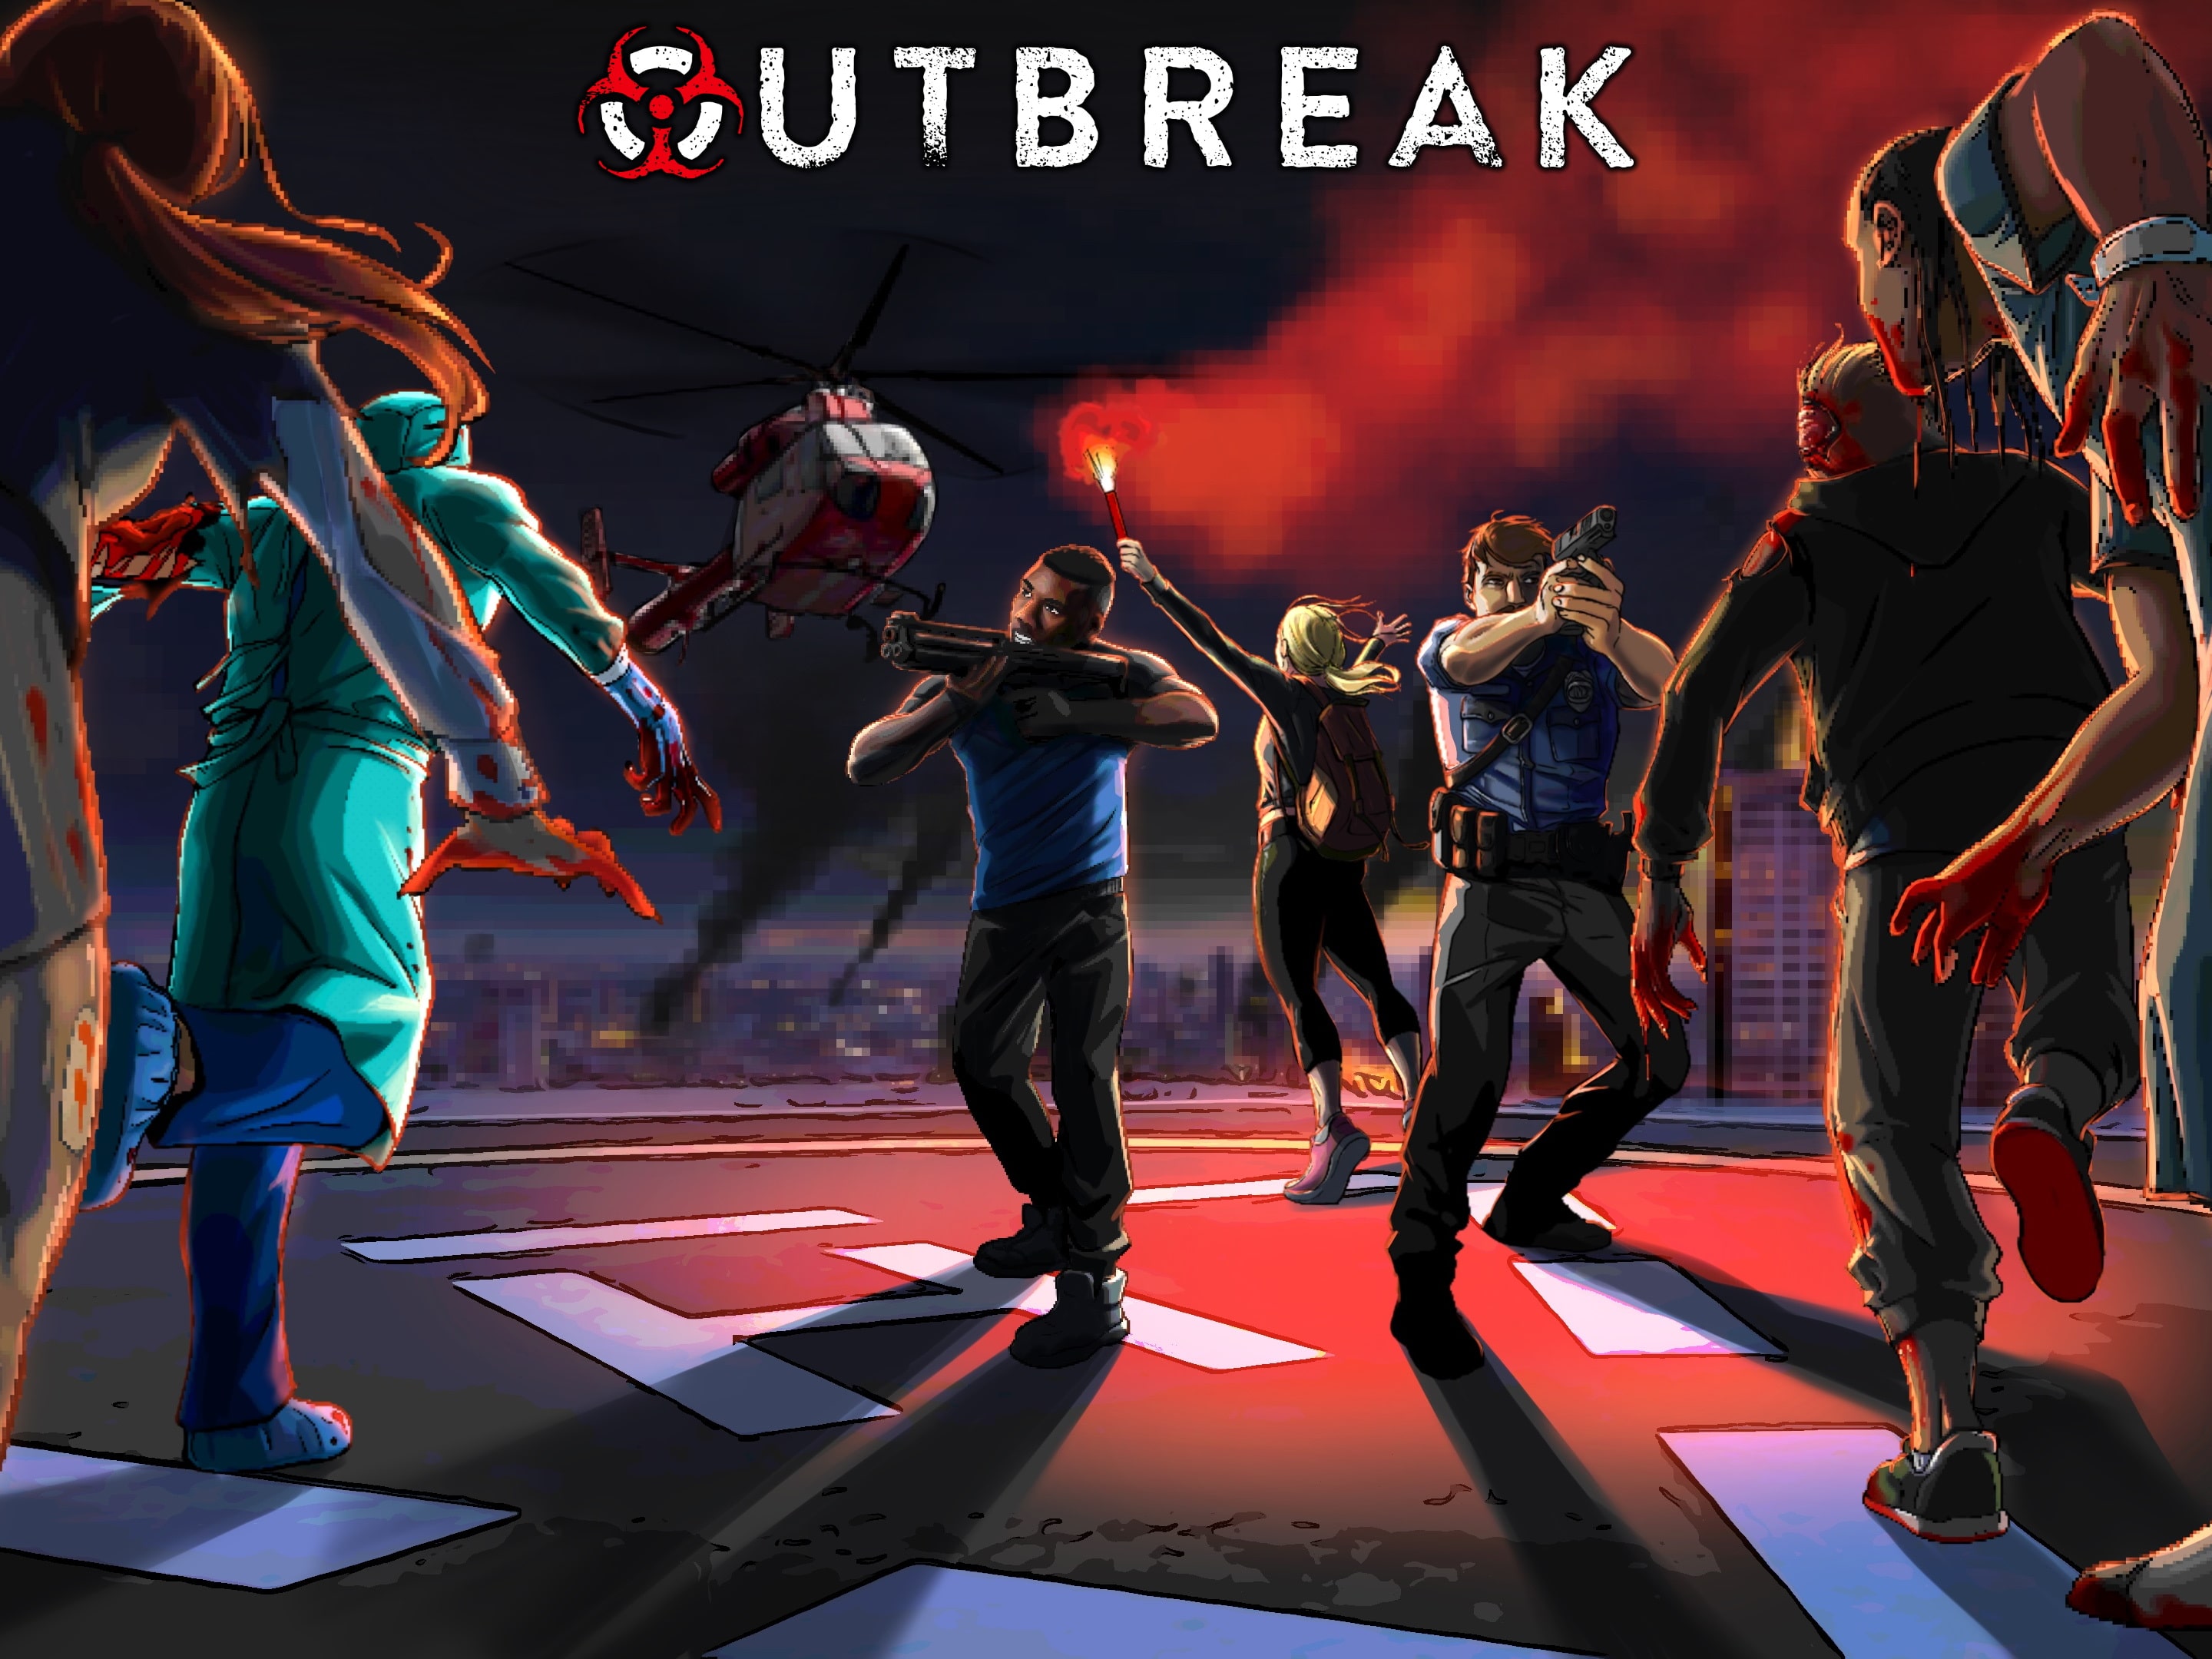 ZOMBIE SIEGE OUTBREAK - Play Online for Free!